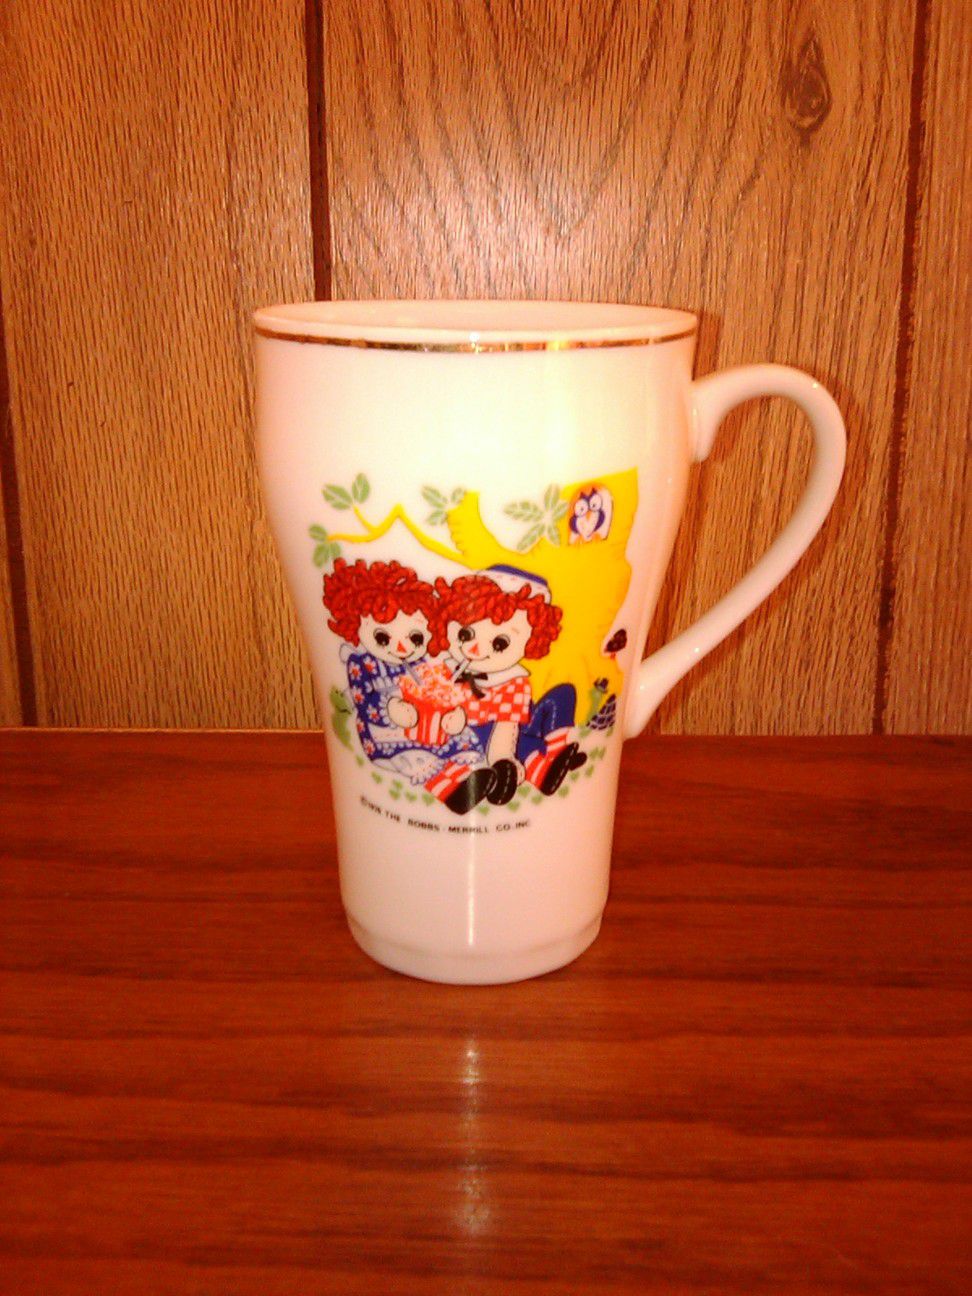 Raggedy Ann and Andy cup